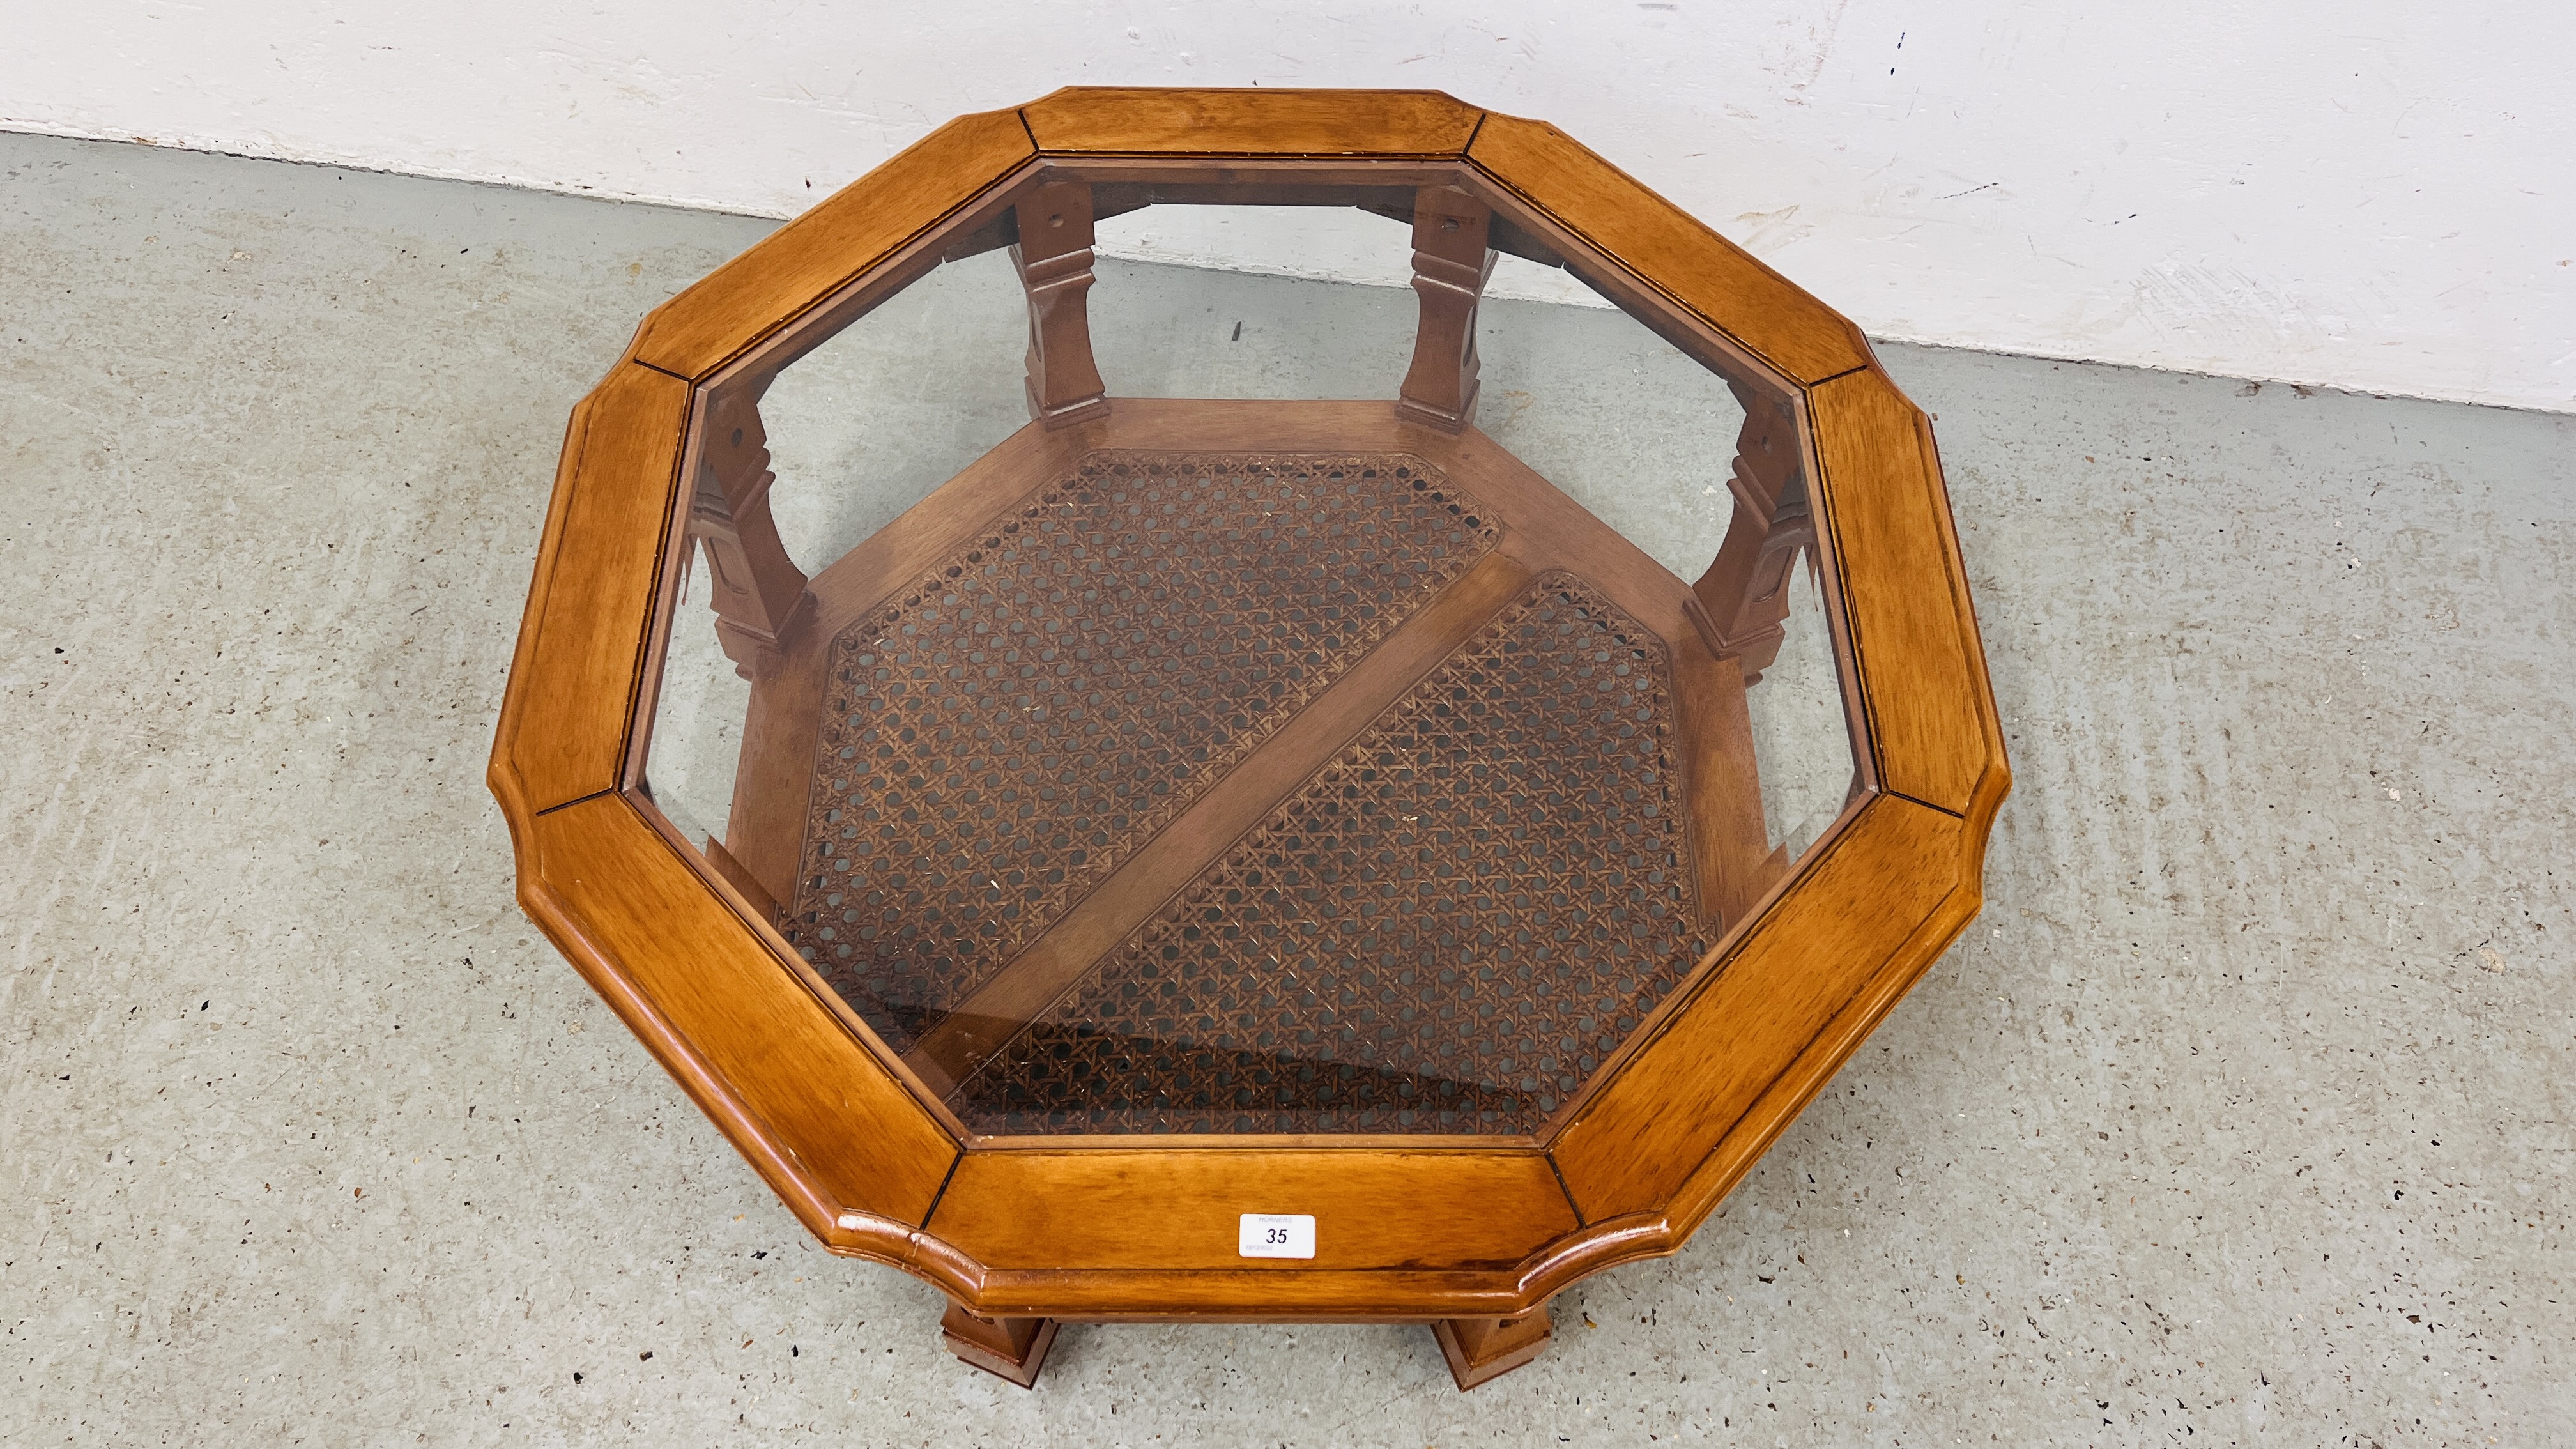 A GLASS TOP OCTAGONAL COFFEE TABLE WITH LOWER BERGERE WORK SHELF - Image 2 of 9